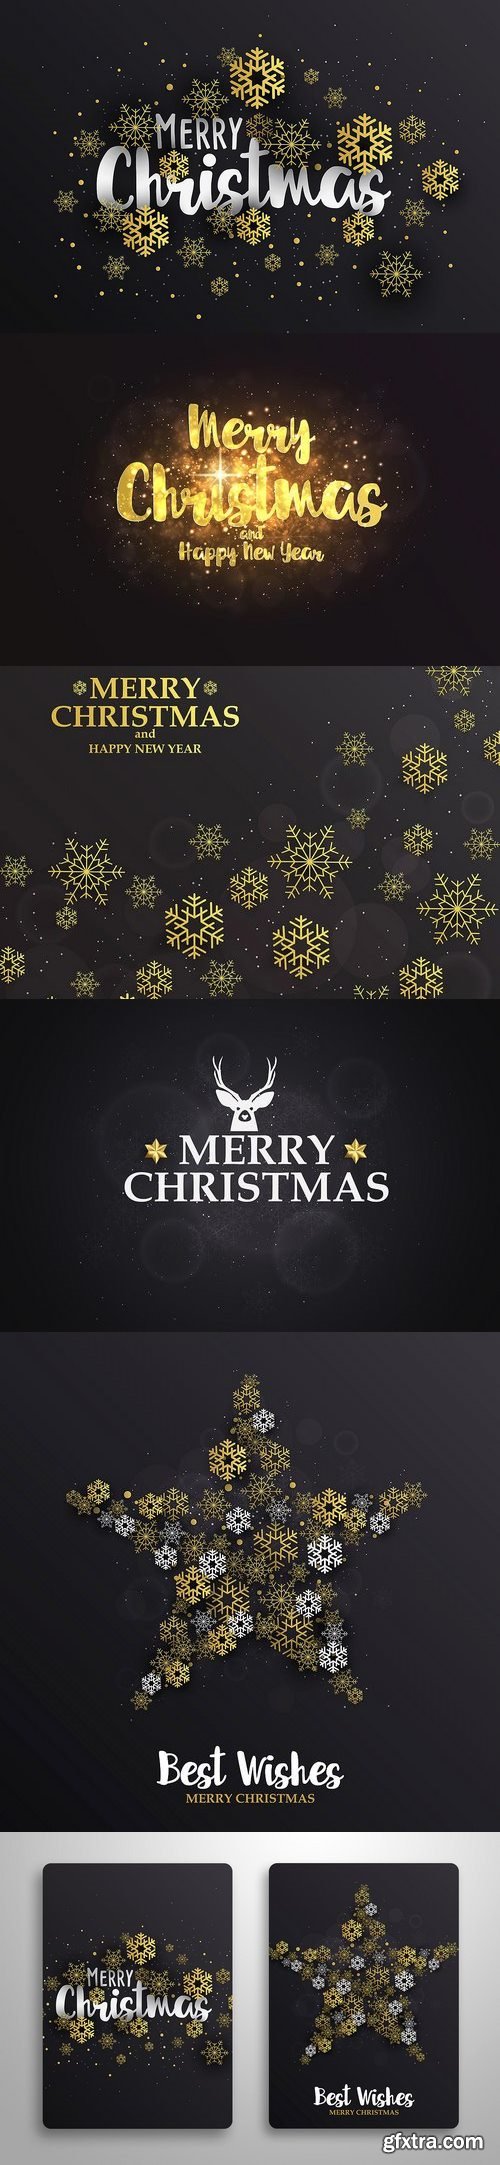 CM - Set of Merry Christmas backgrounds 1067695